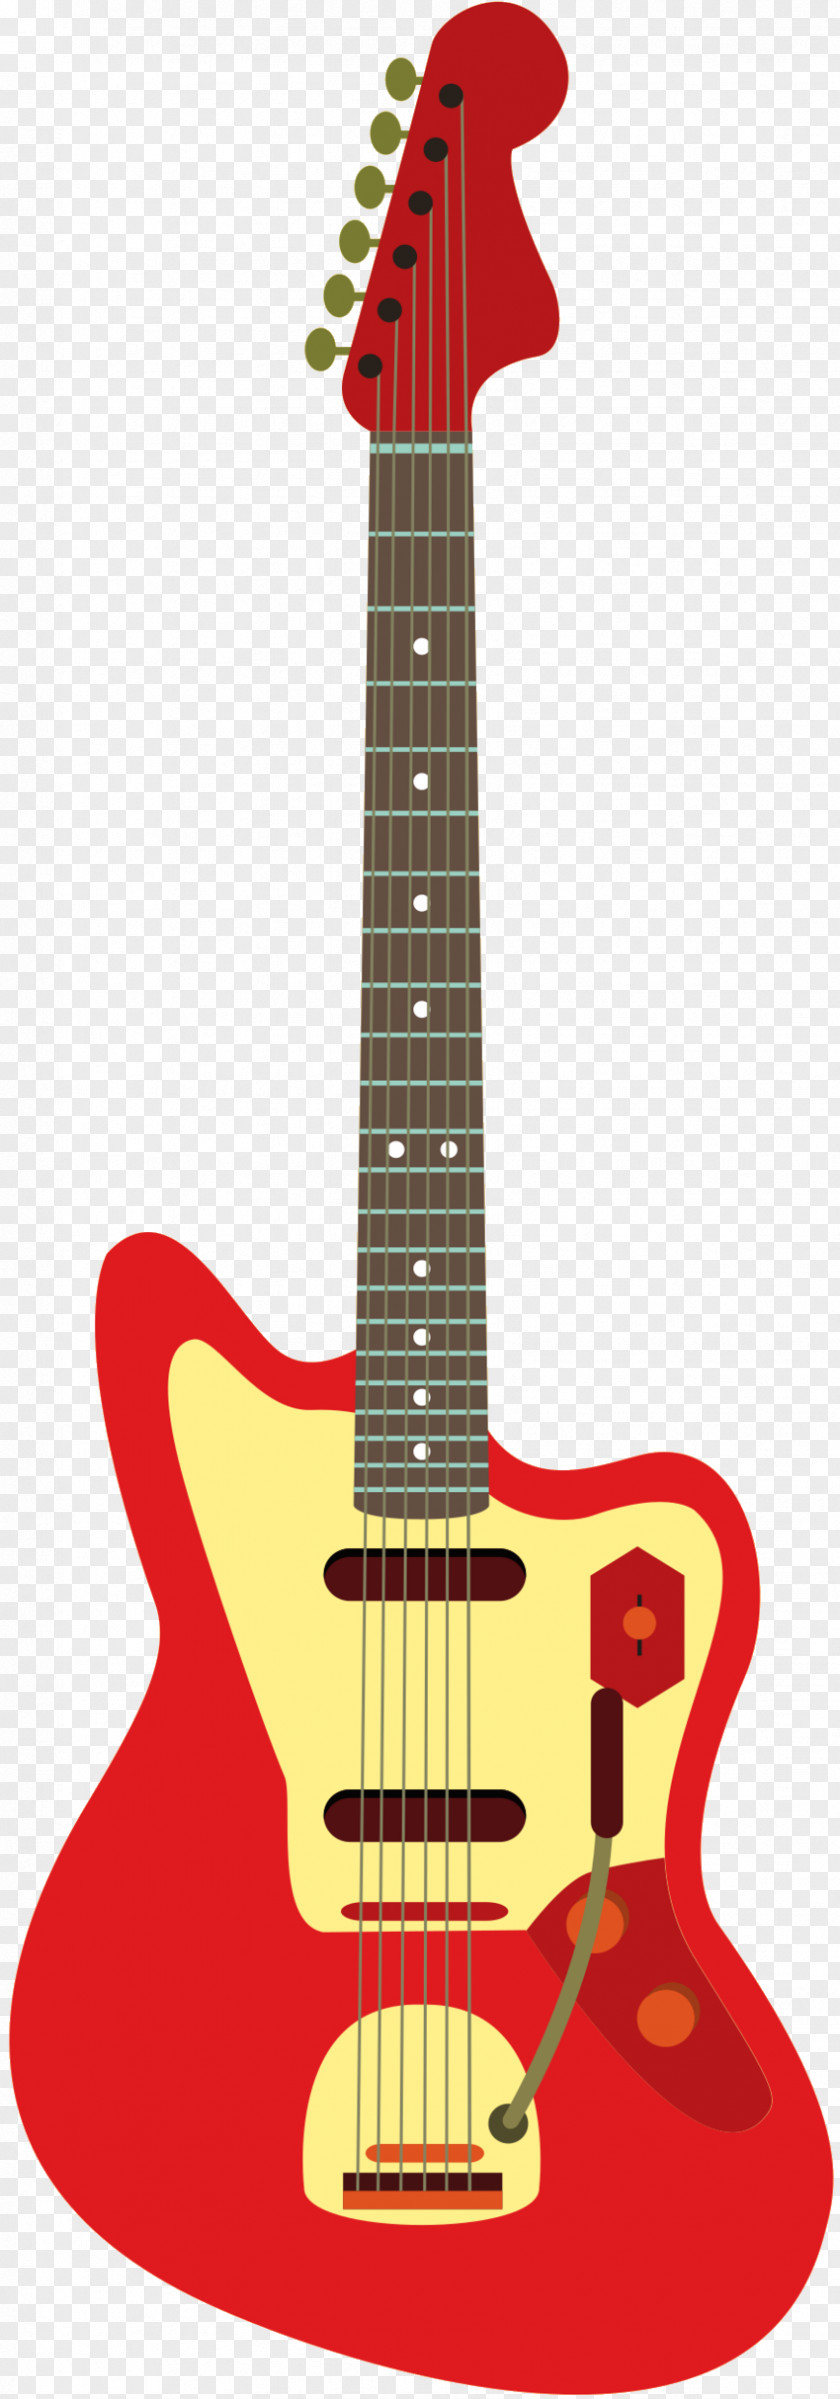 Fender Squier Affinity Telecaster Electric Guitar Musical Instruments Corporation PNG